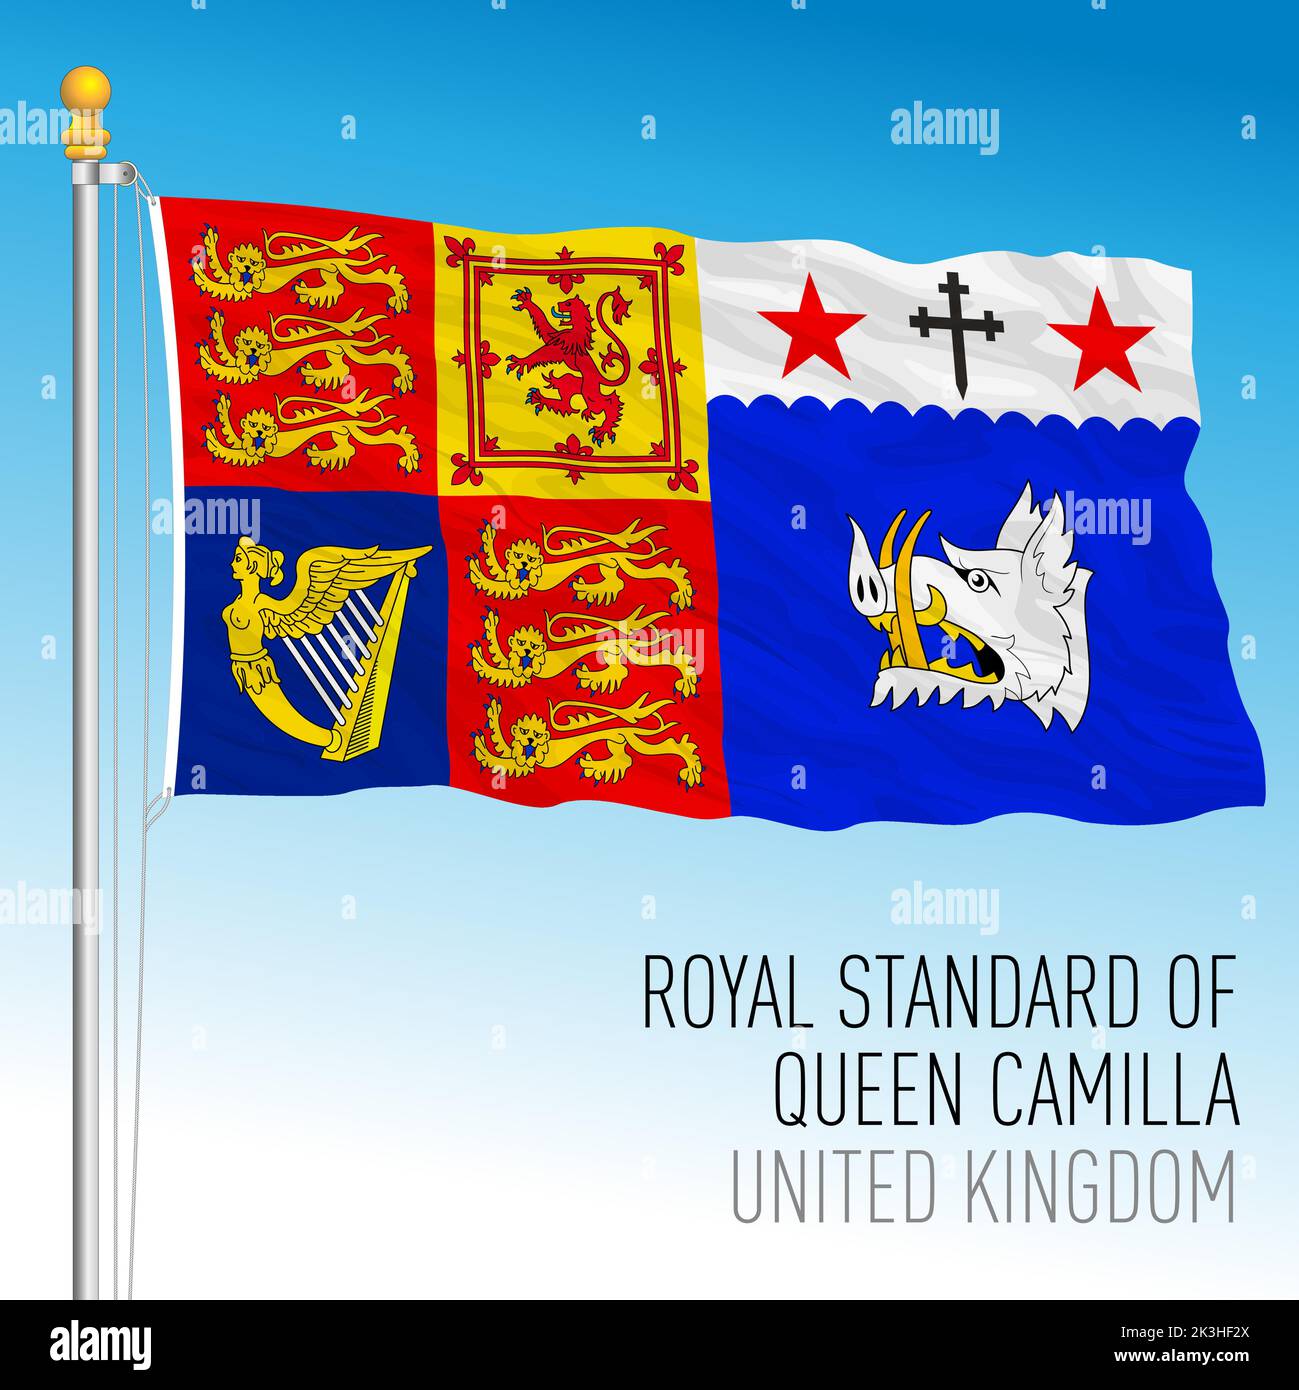 Camilla Queen Royal Standard flag, United Kingdom flag, Queen Consort of the King Charles Third, 2022 Stock Vector